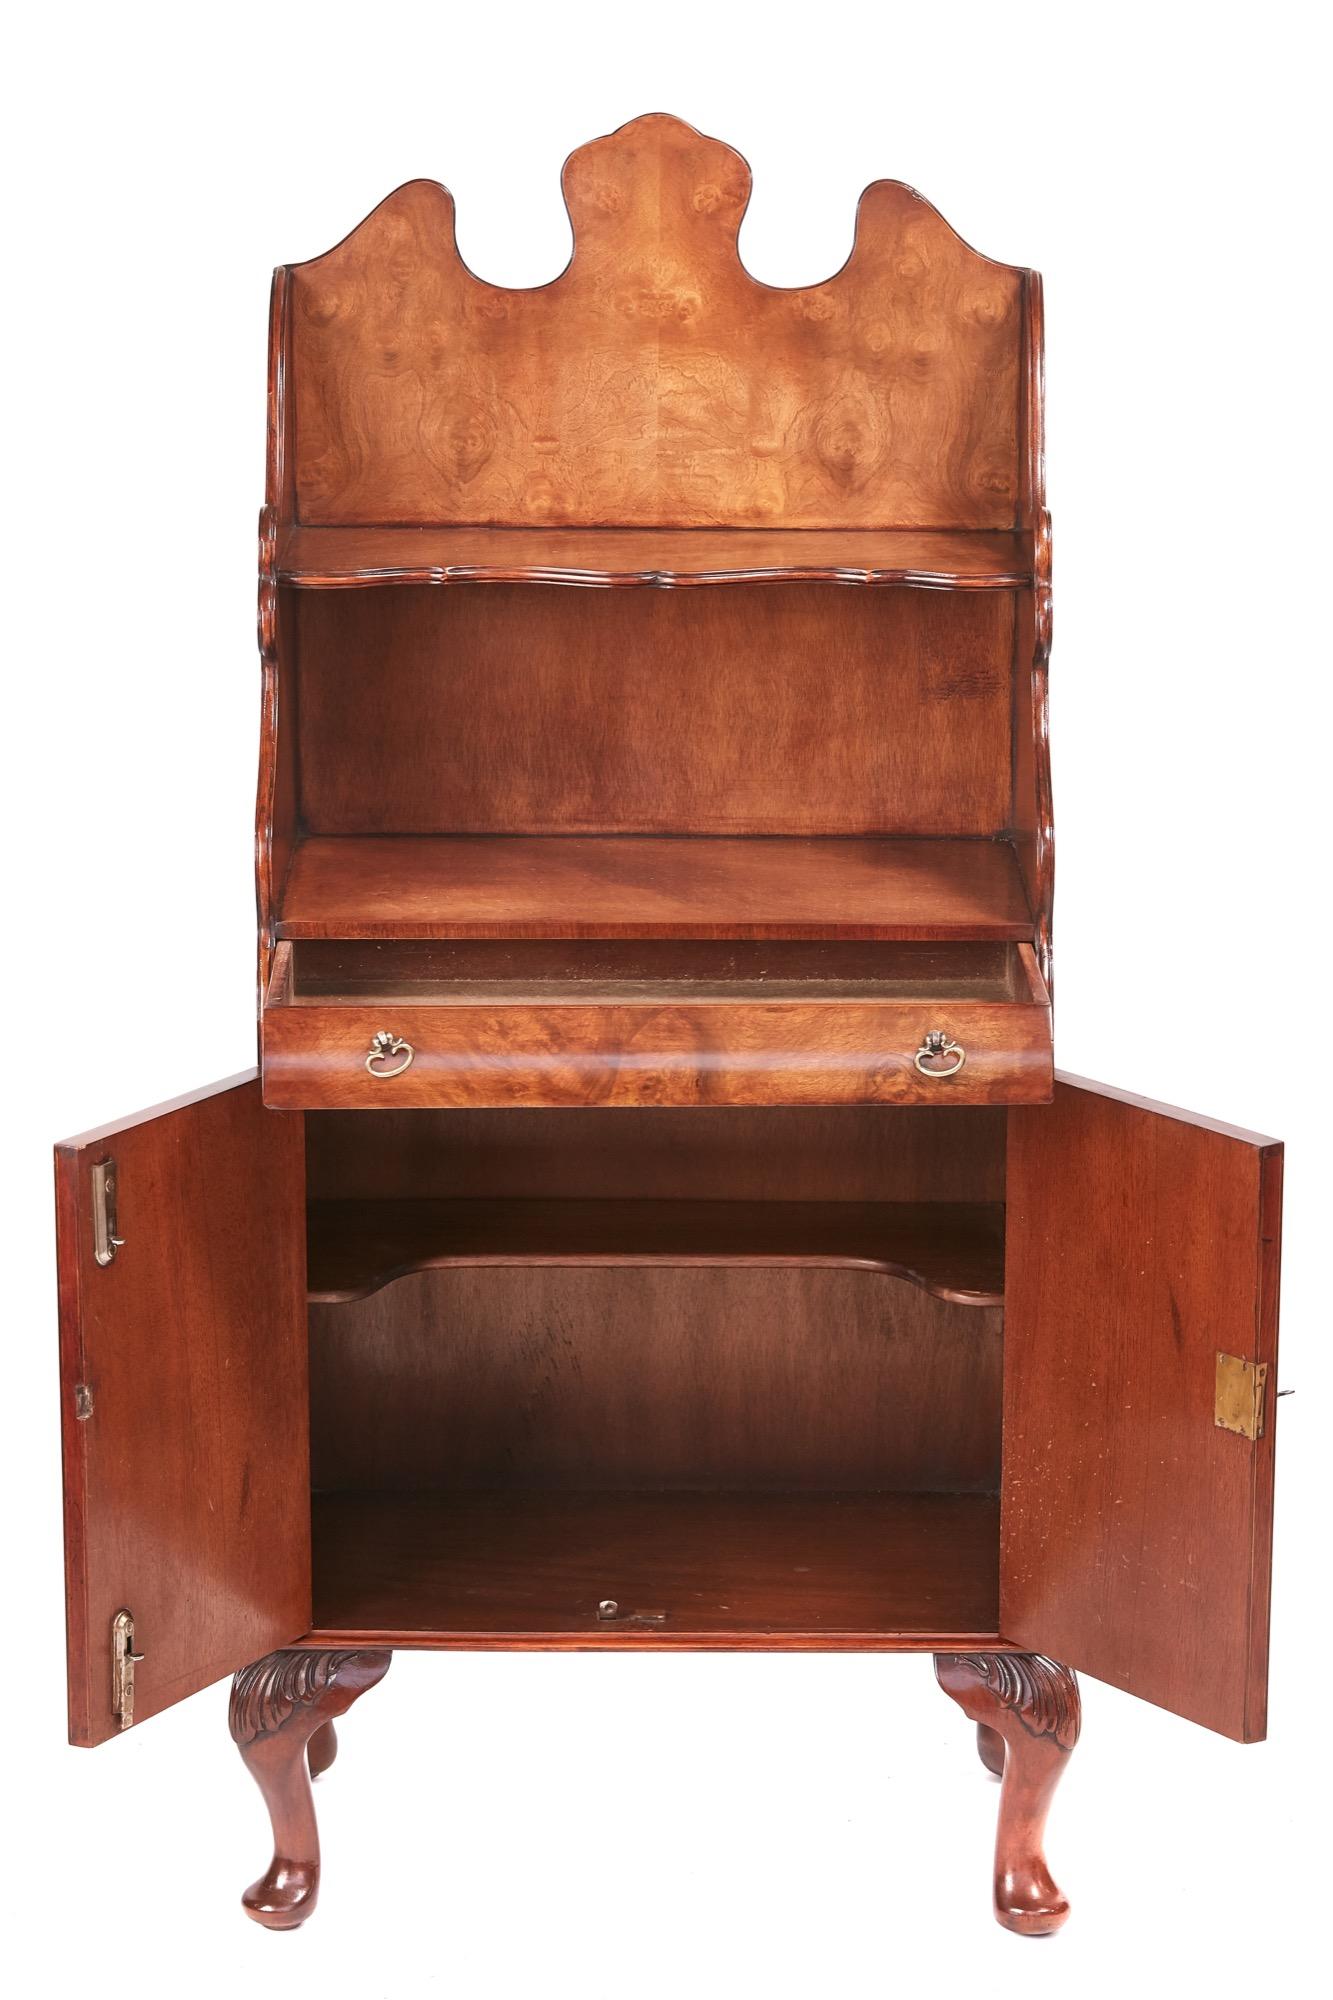 Quality burr walnut near pair of side cabinets, having lovely shaped backs, fitted shelf, one long shaped drawer with original brass handles, two burr walnut cupboard doors, standing on shaped carved cabriole legs
Lovely color and